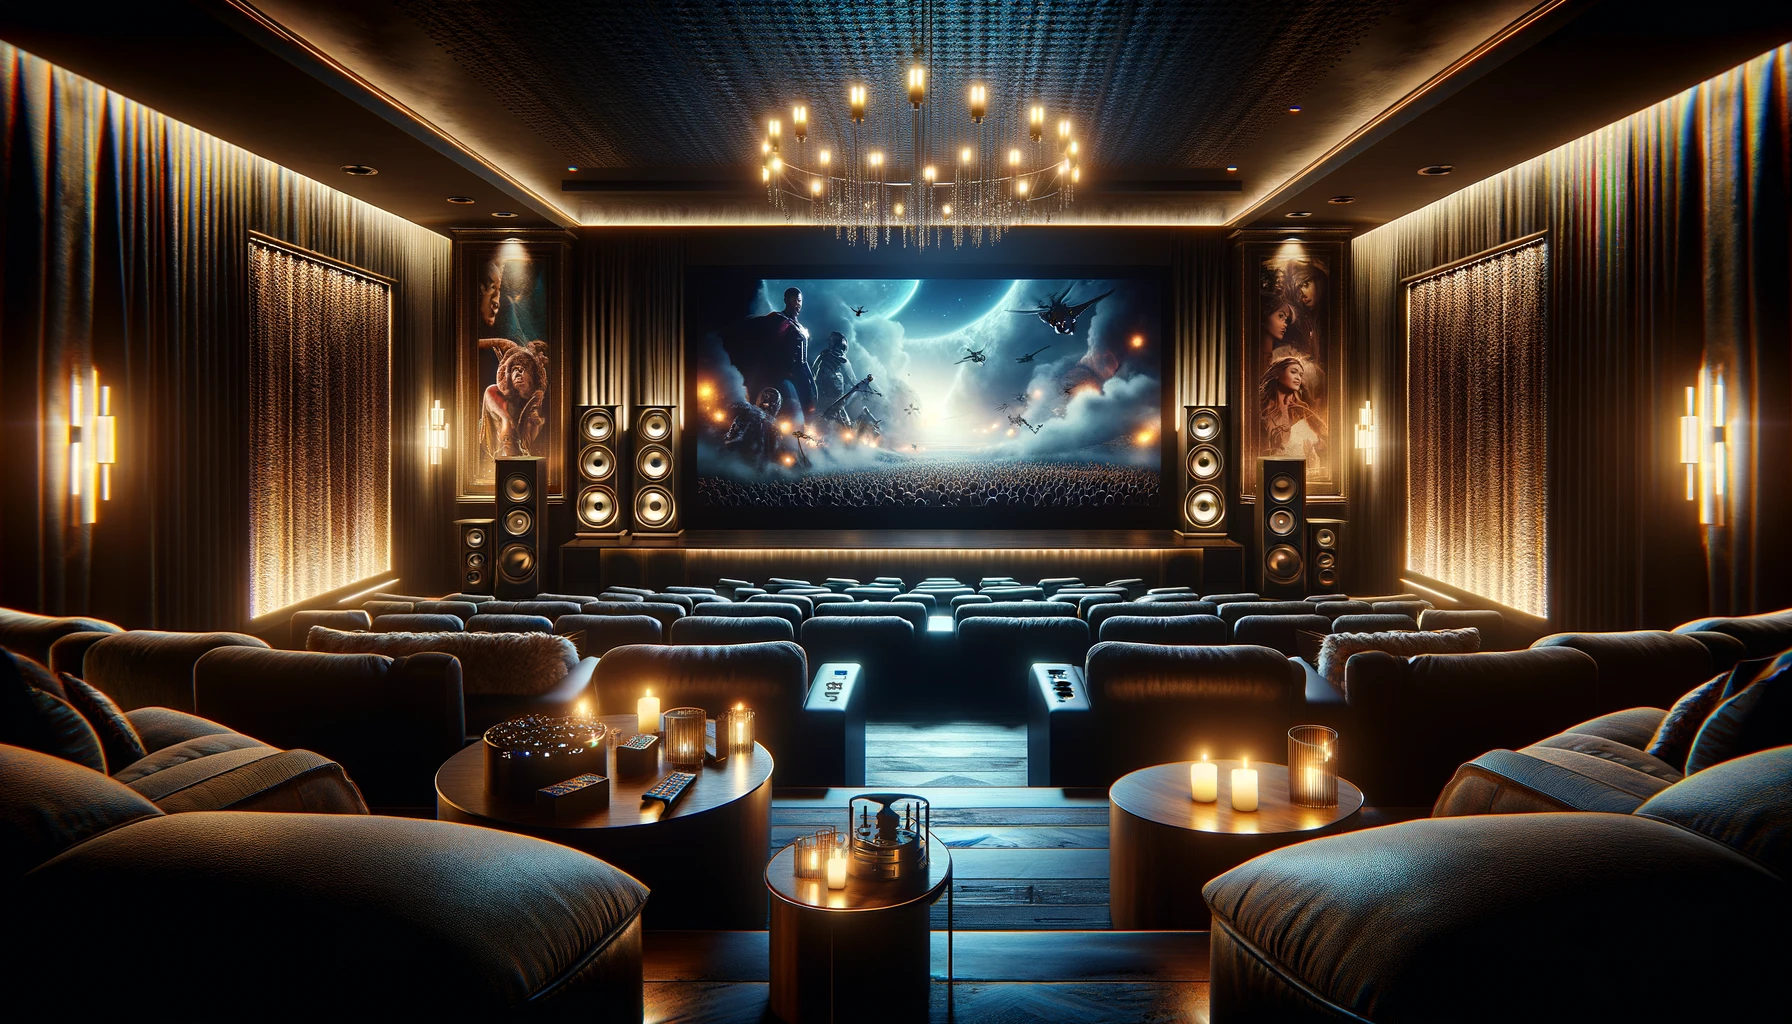 A large, luxurious home theater with projector and surround sound speakers